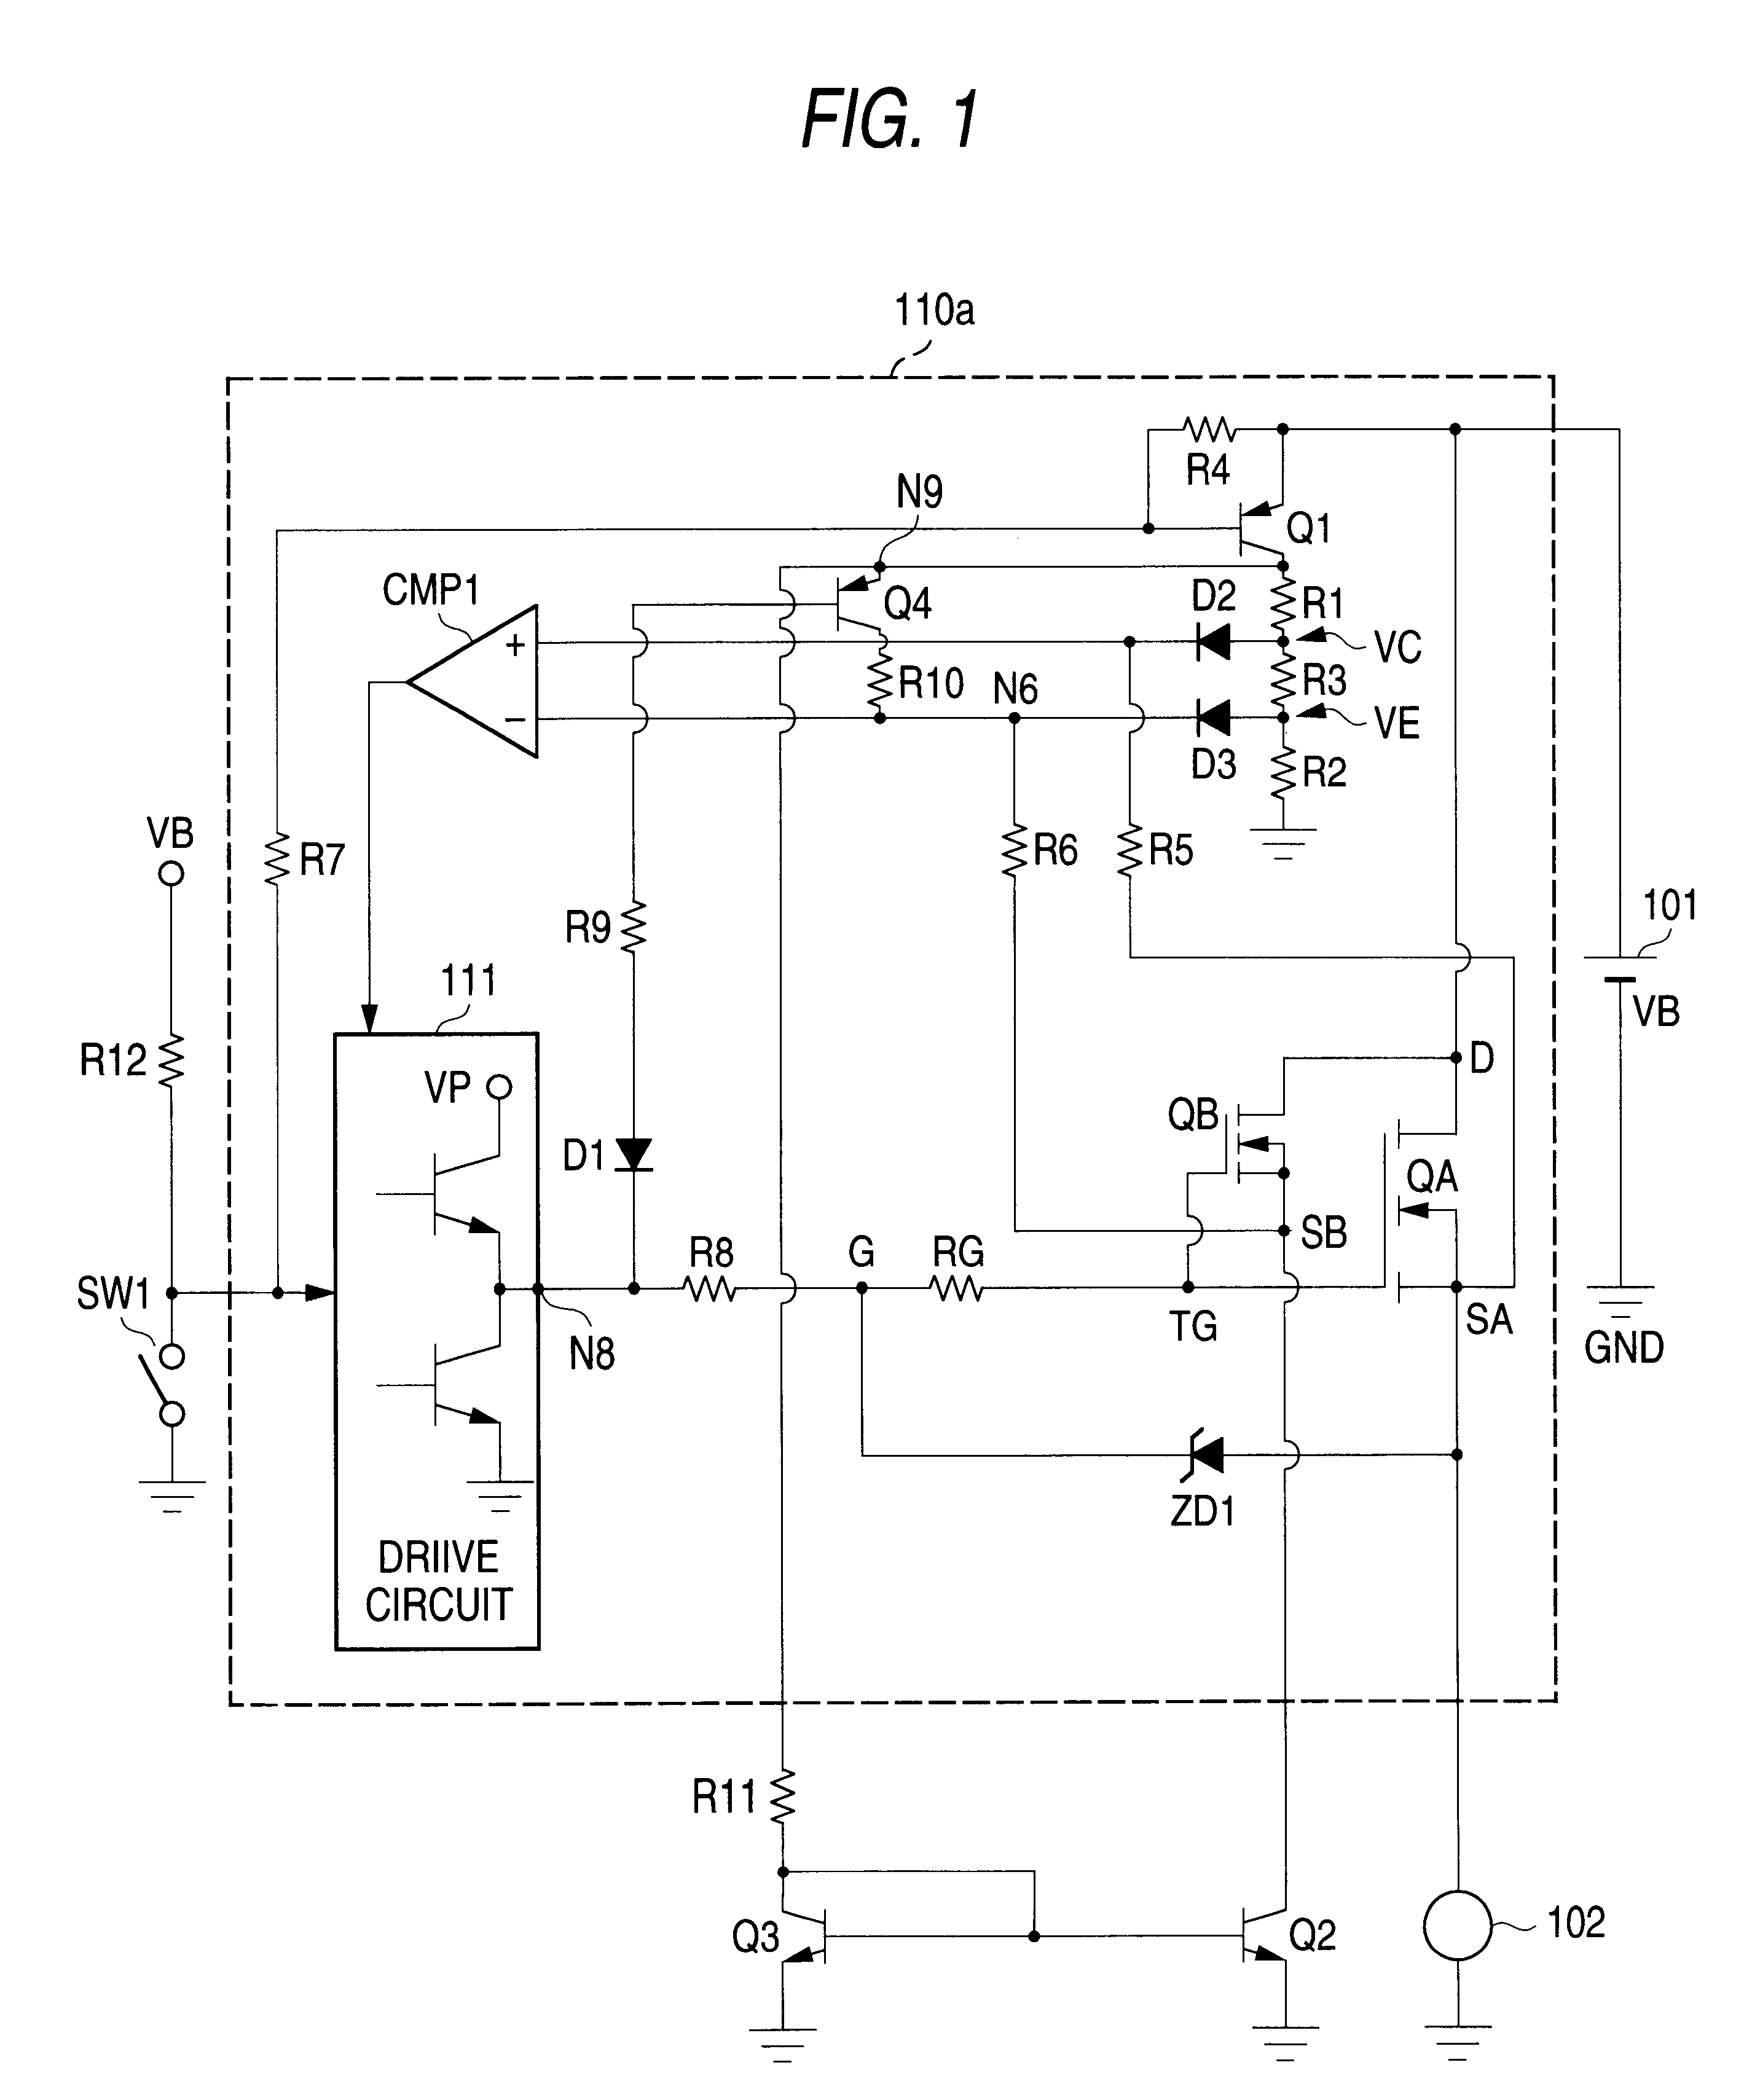 Power supply control device and method